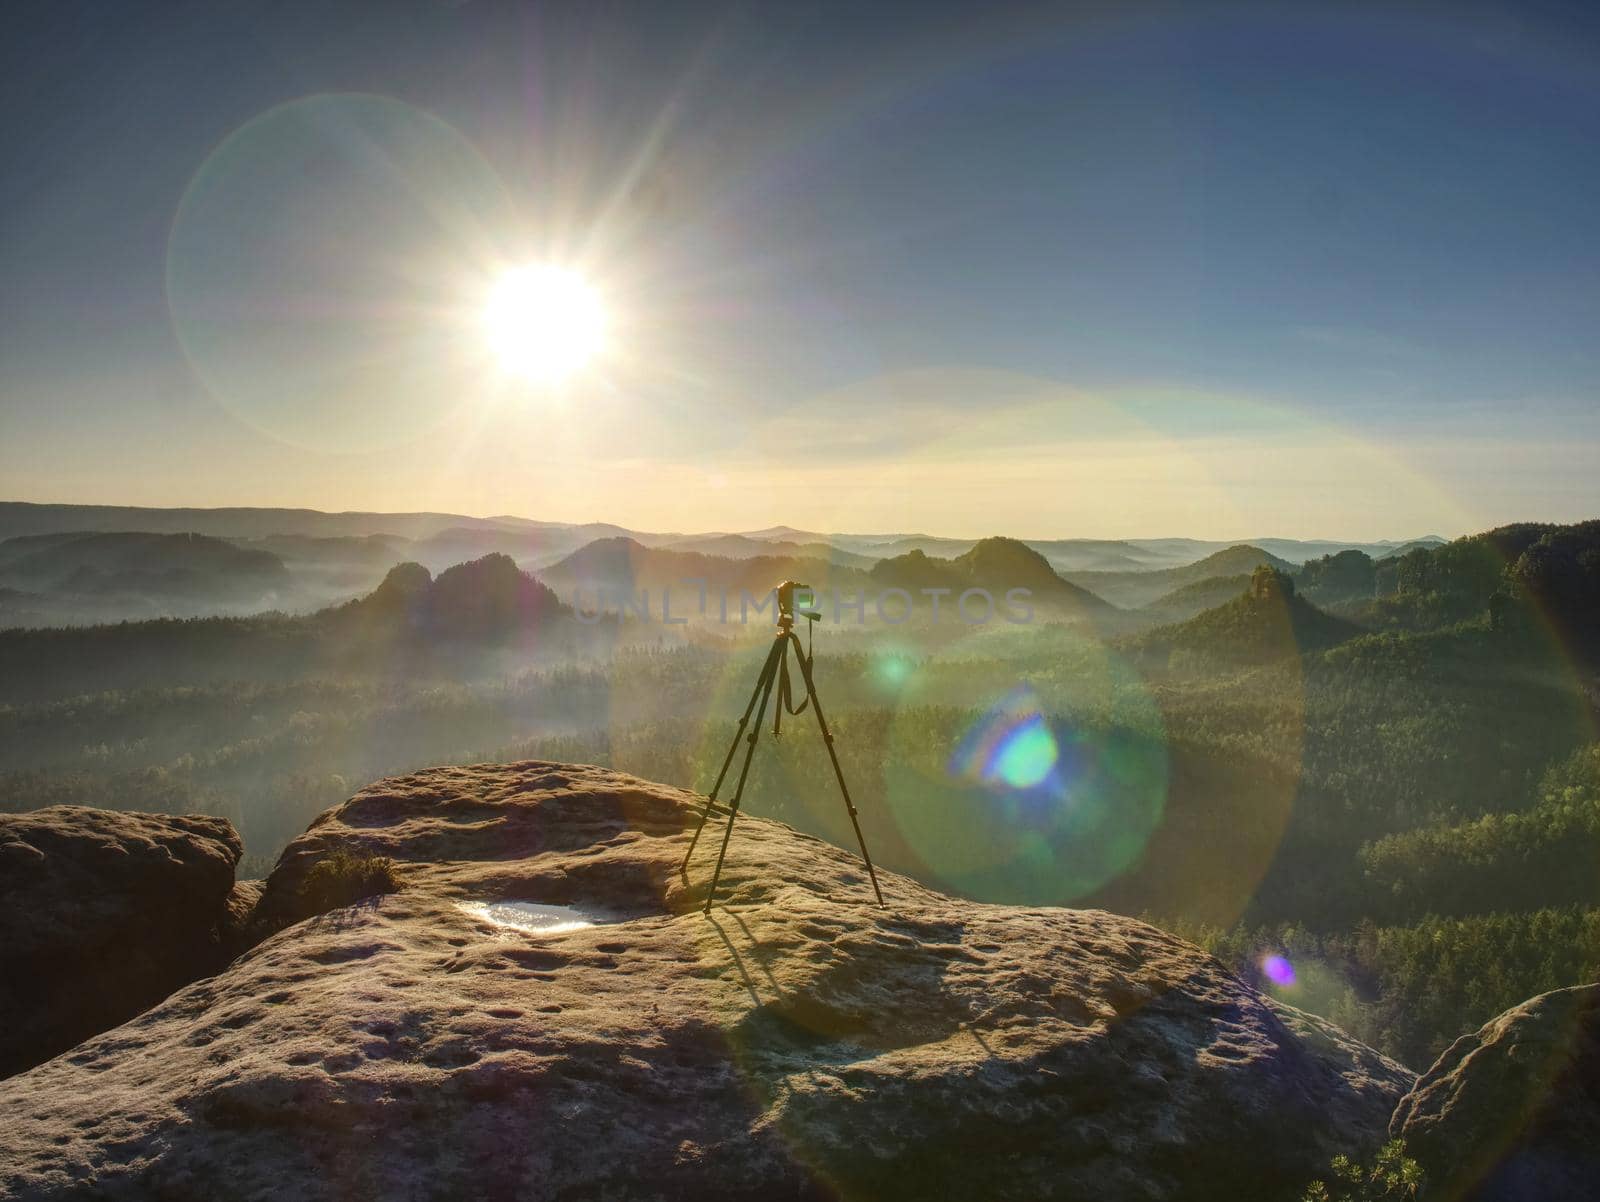 Digital photo camera with tripod  record video during sunrise  by rdonar2